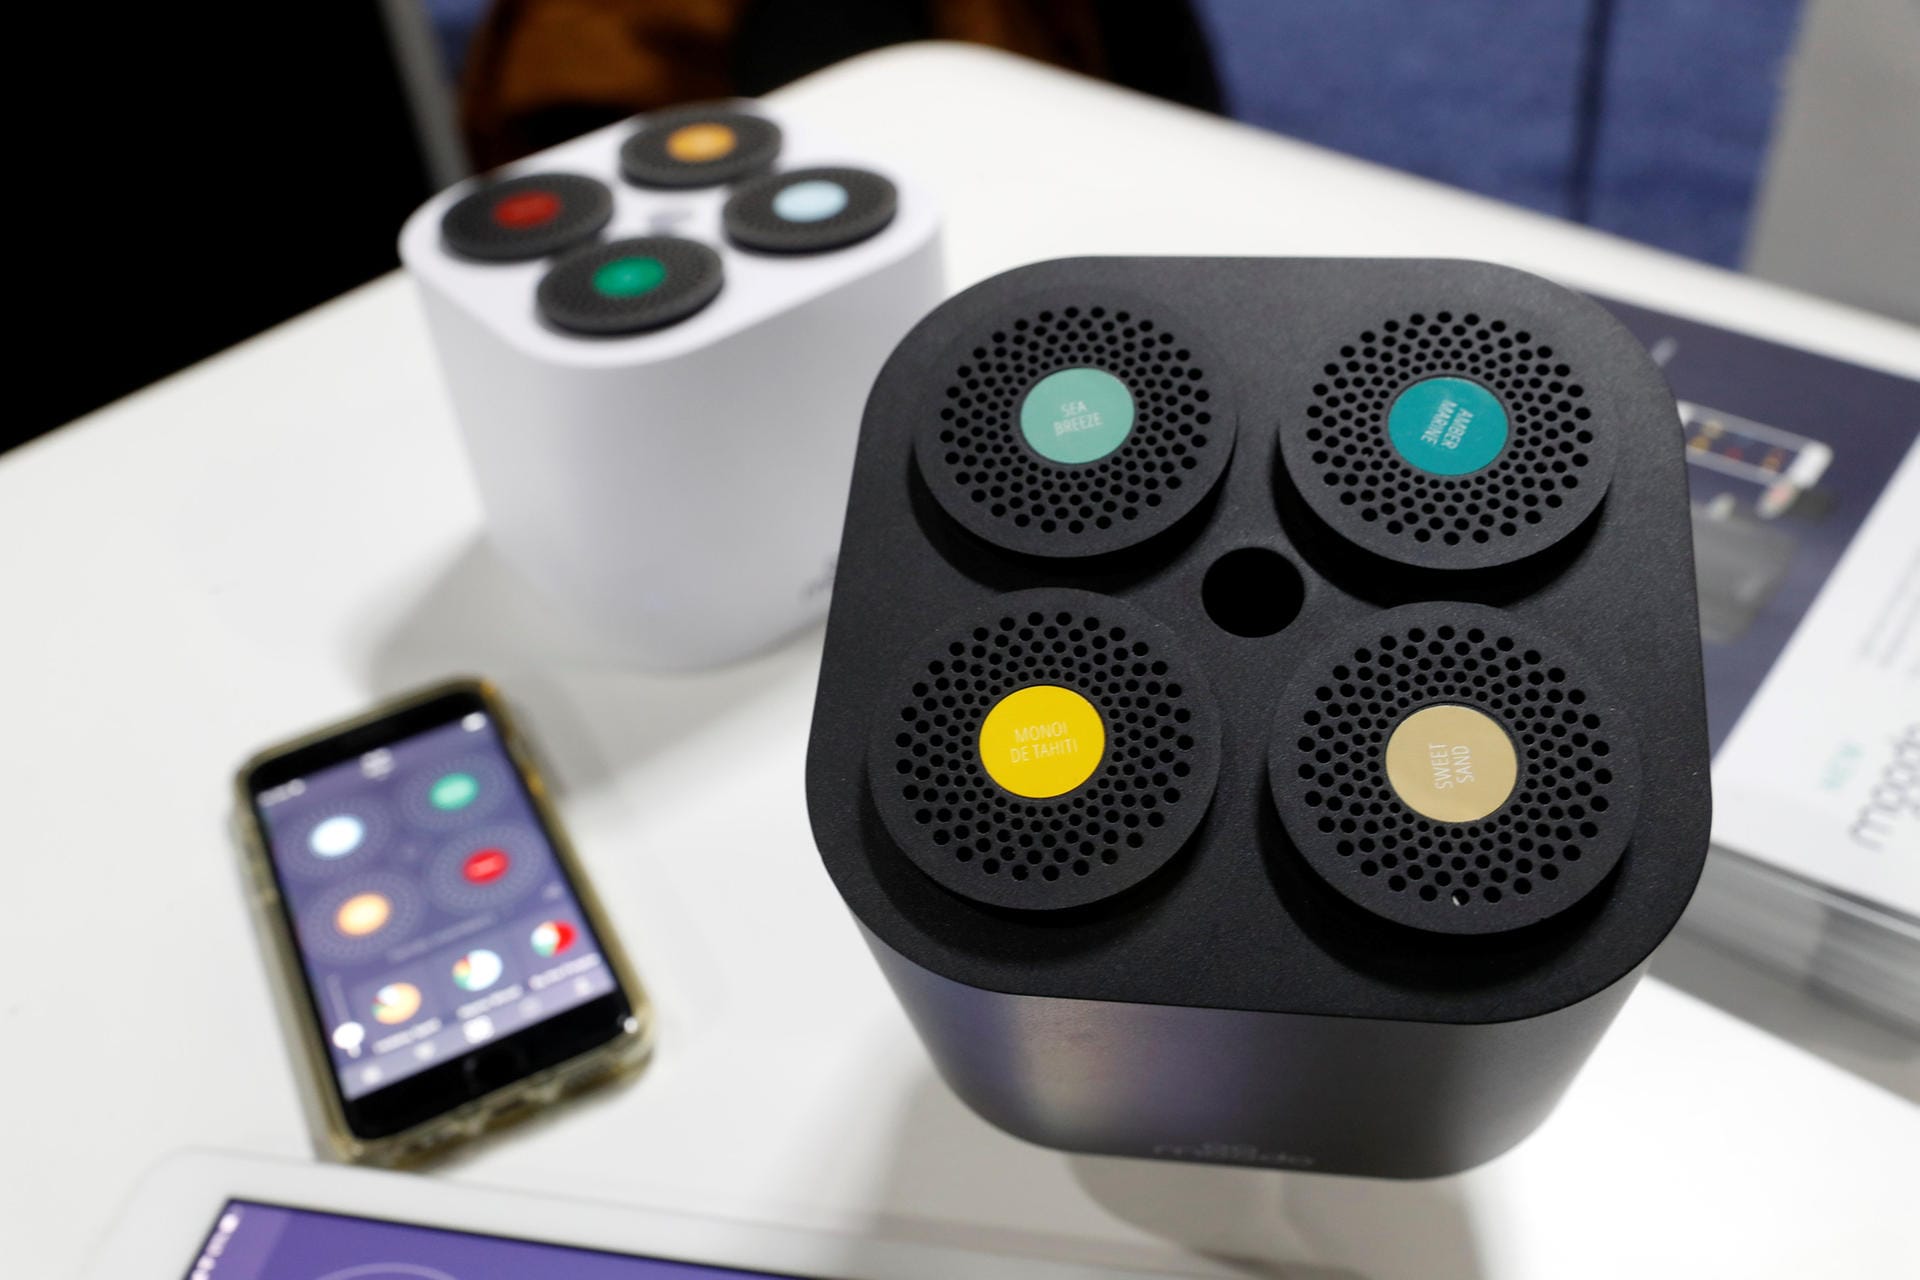 Moodo smart-home fragrance diffusers, which can mix custom aromas via a smartphone app, are displayed at "CES Unveiled" during the 2019 CES in Las Vegas